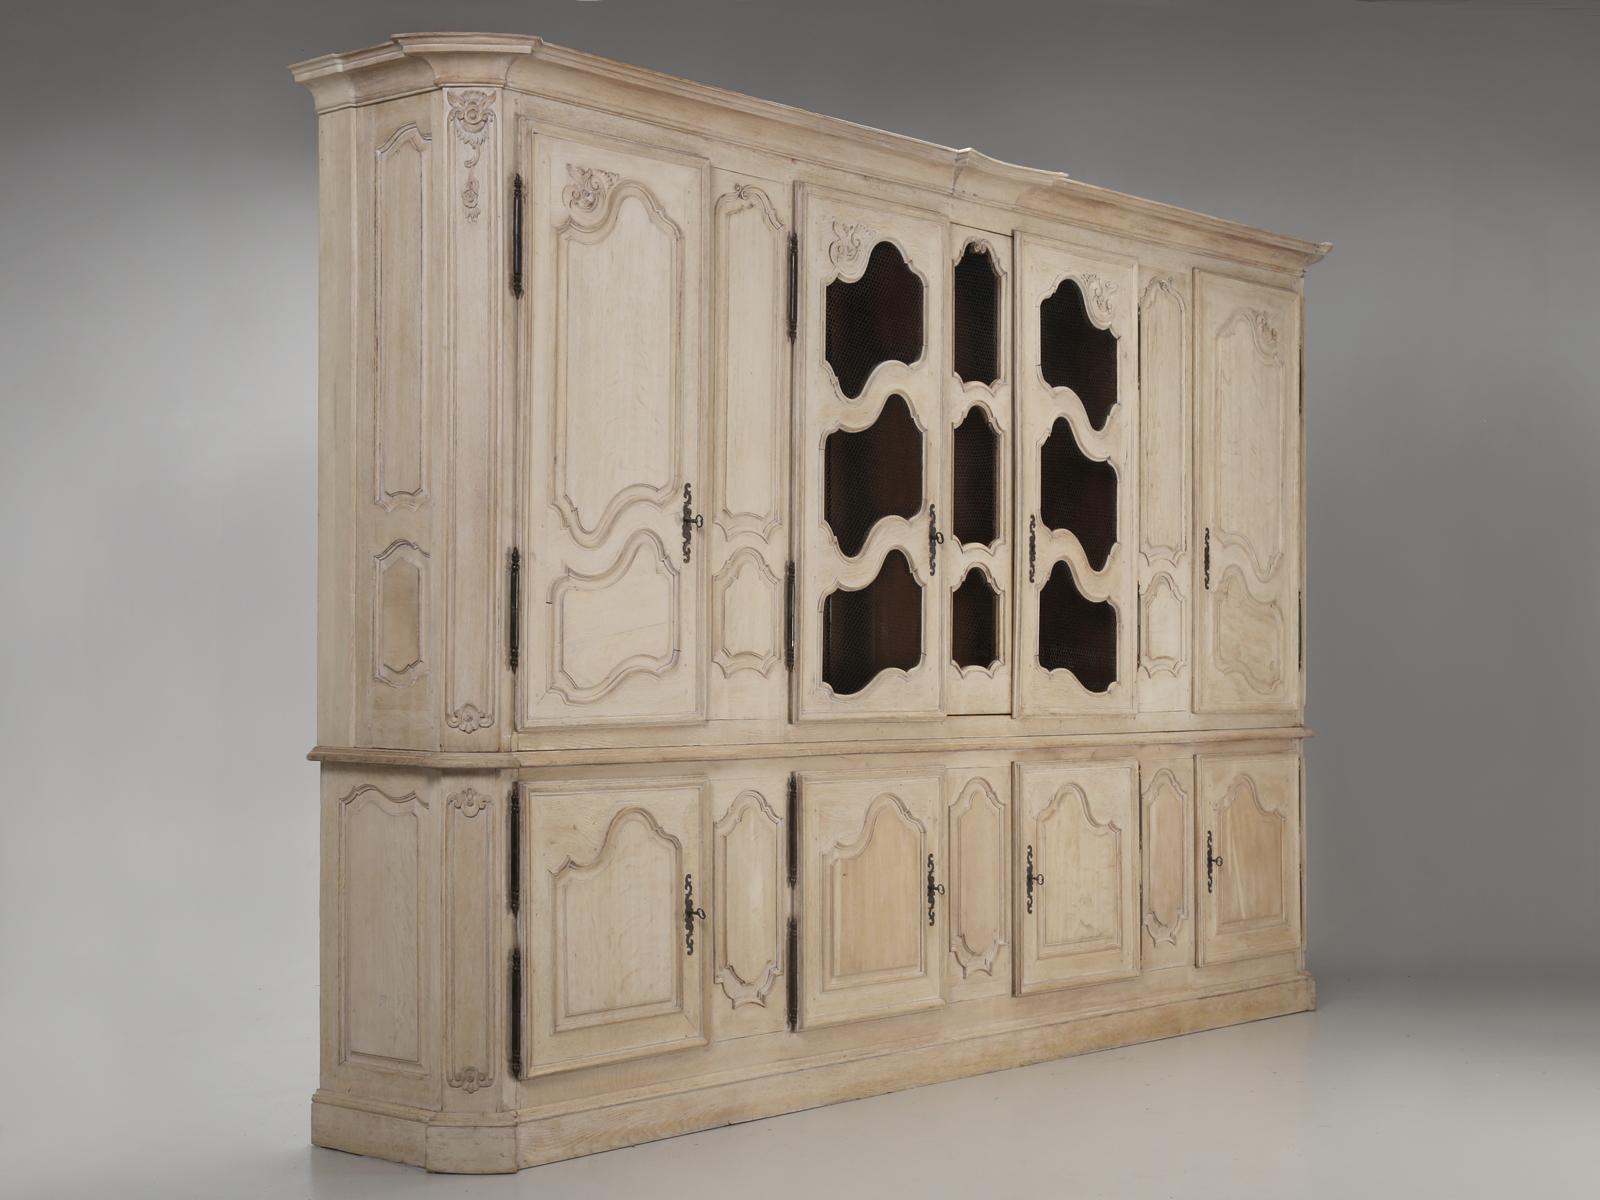 Antique French Limed Oak Cabinet, of massive proportions. We seldom, if ever, find a genuine Antique French, circa 1800s Cabinet, of such grandeur. Our Old Plank workshop, completely disassembled and rebuilt all the joints, before the Antique French